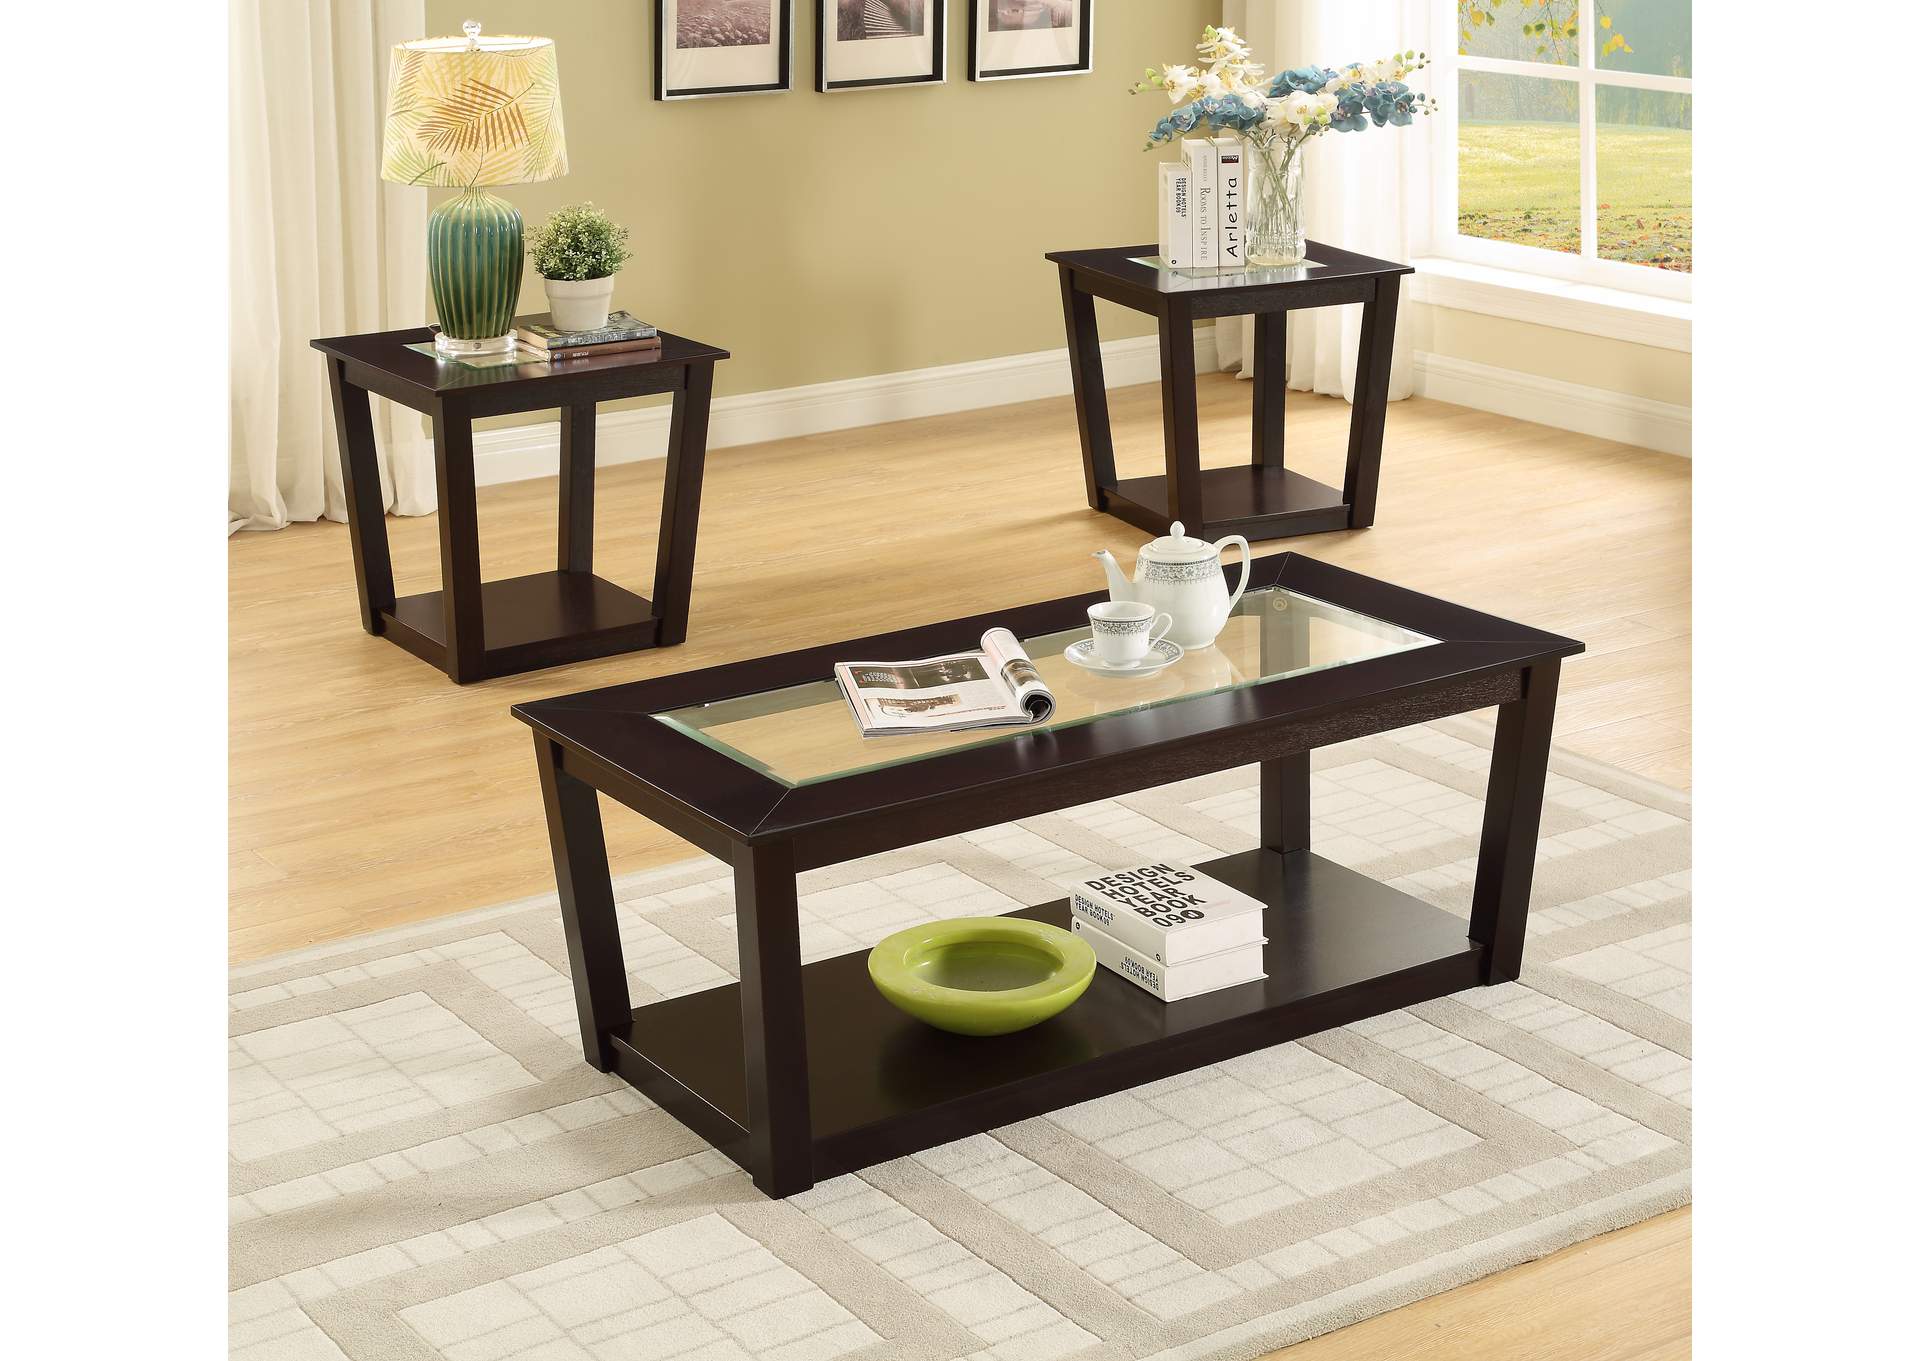 Brown 3 Piece Coffee & End Table Set,Global Trading